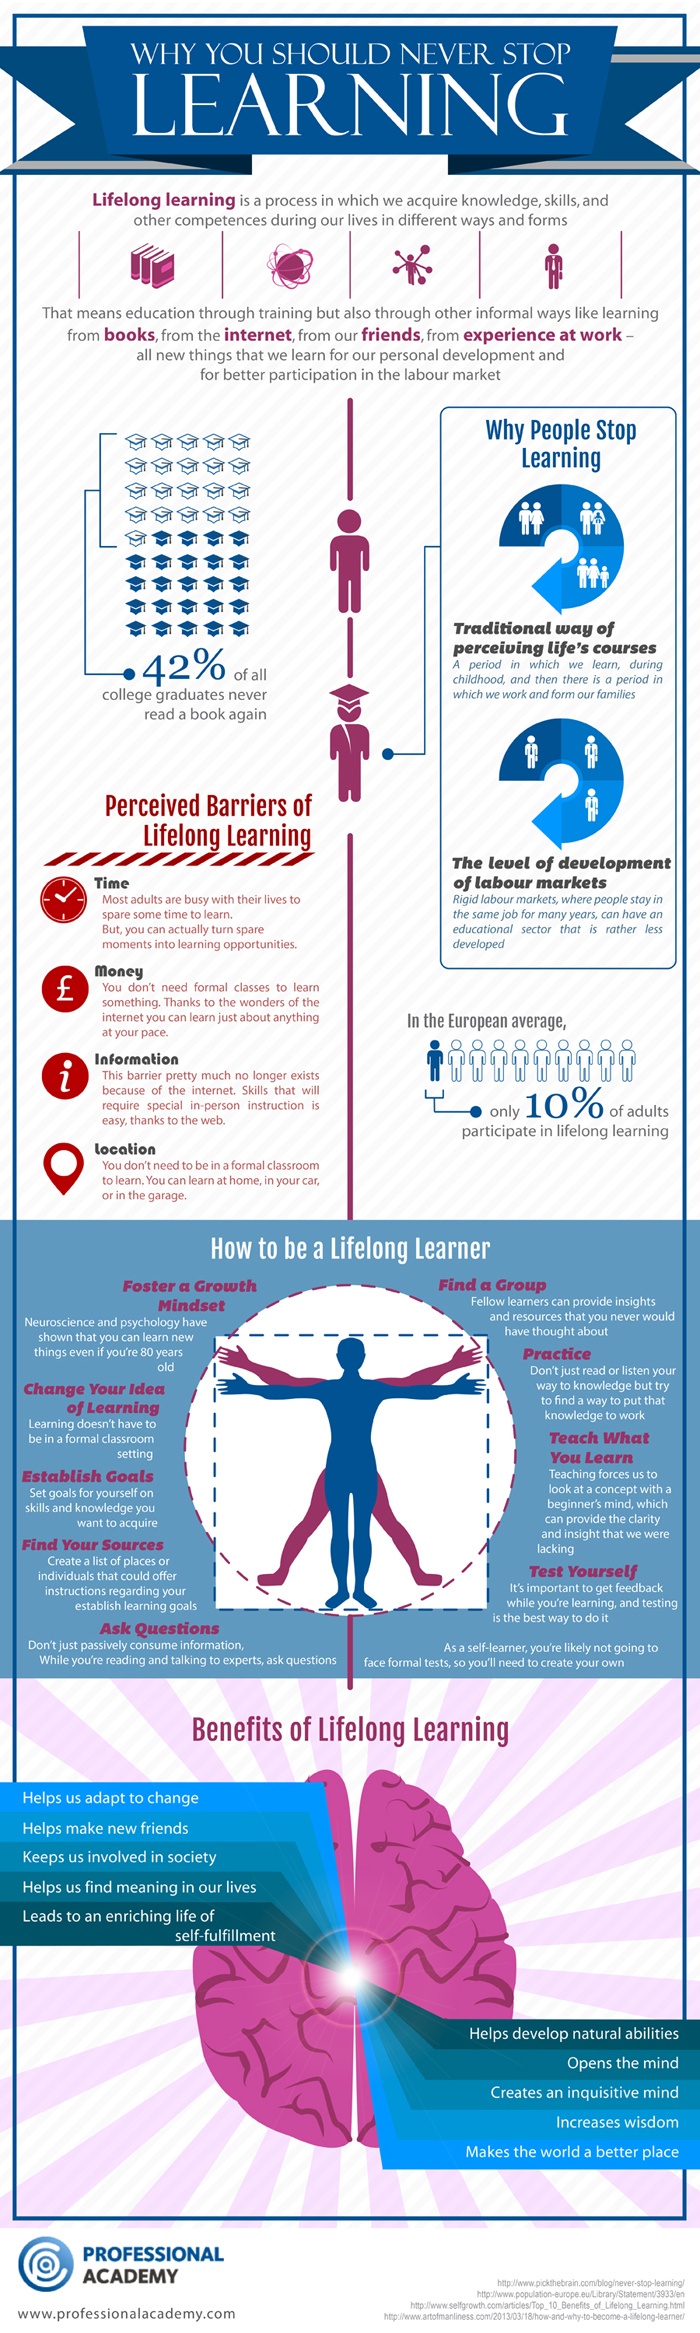 Why-You-Should-Never-Stop-Learning-Infographic